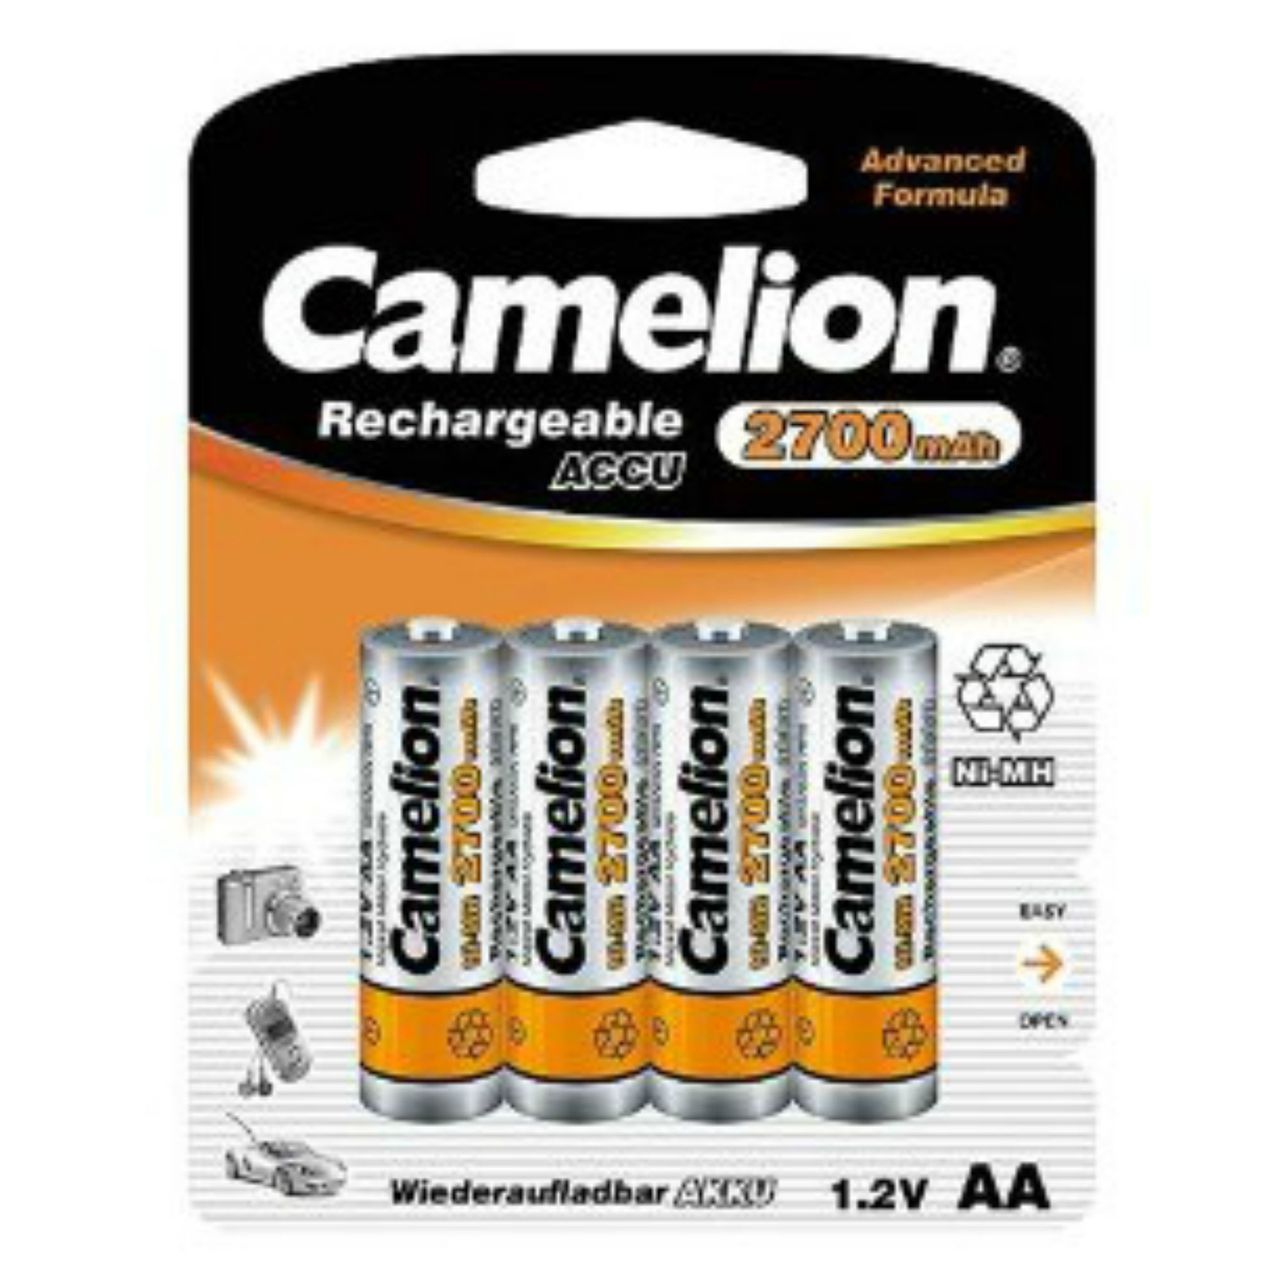 Camelion AA Rechargeable NiMH Batteries 2700mAH 4 Pack Retail + FREE SHIPPING!